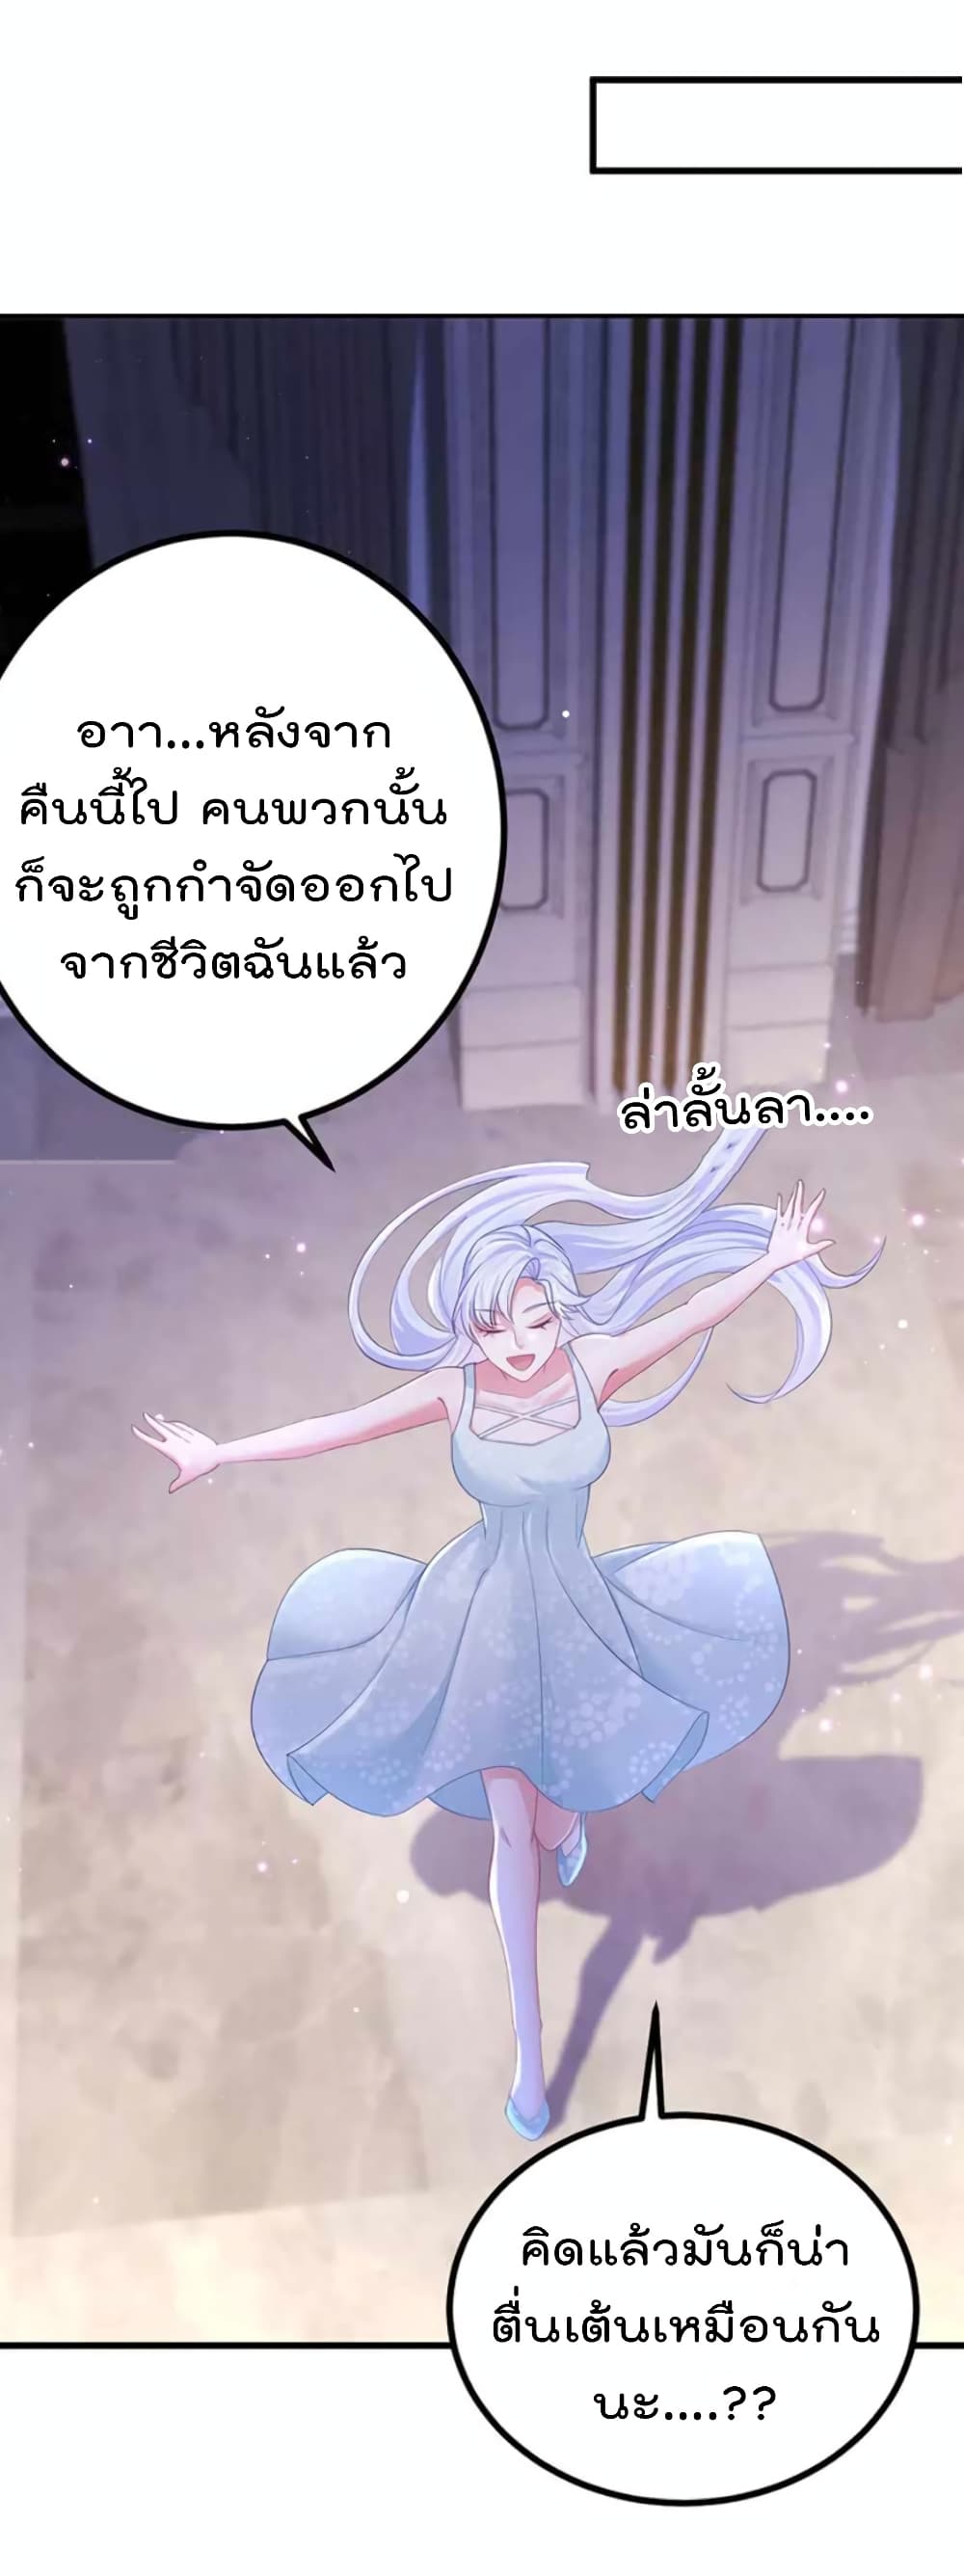 One Hundred Ways to Abuse Scum ตอนที่ 93 (27)